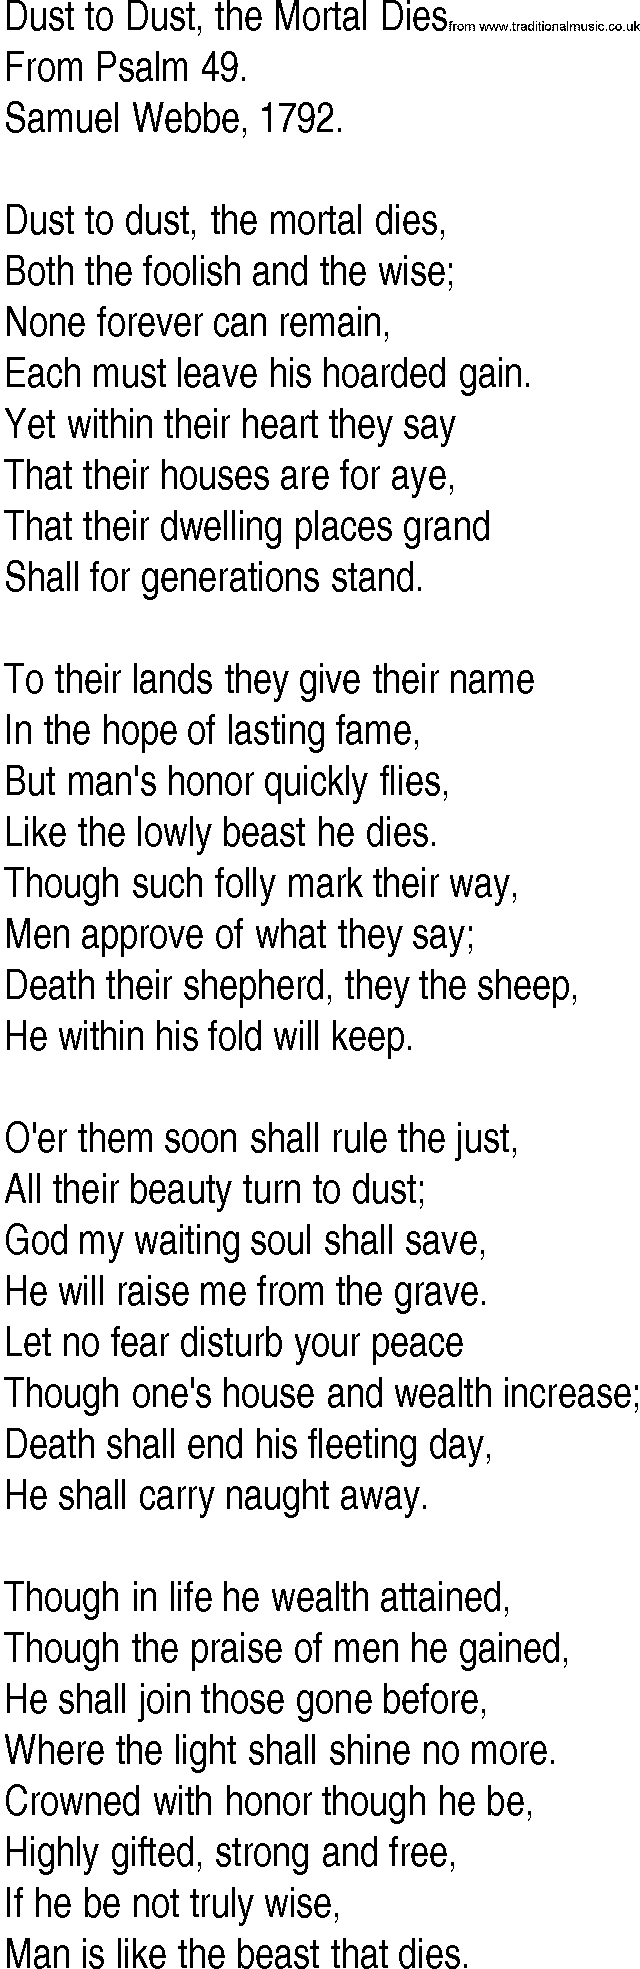 Hymn and Gospel Song: Dust to Dust, the Mortal Dies by From Psalm lyrics